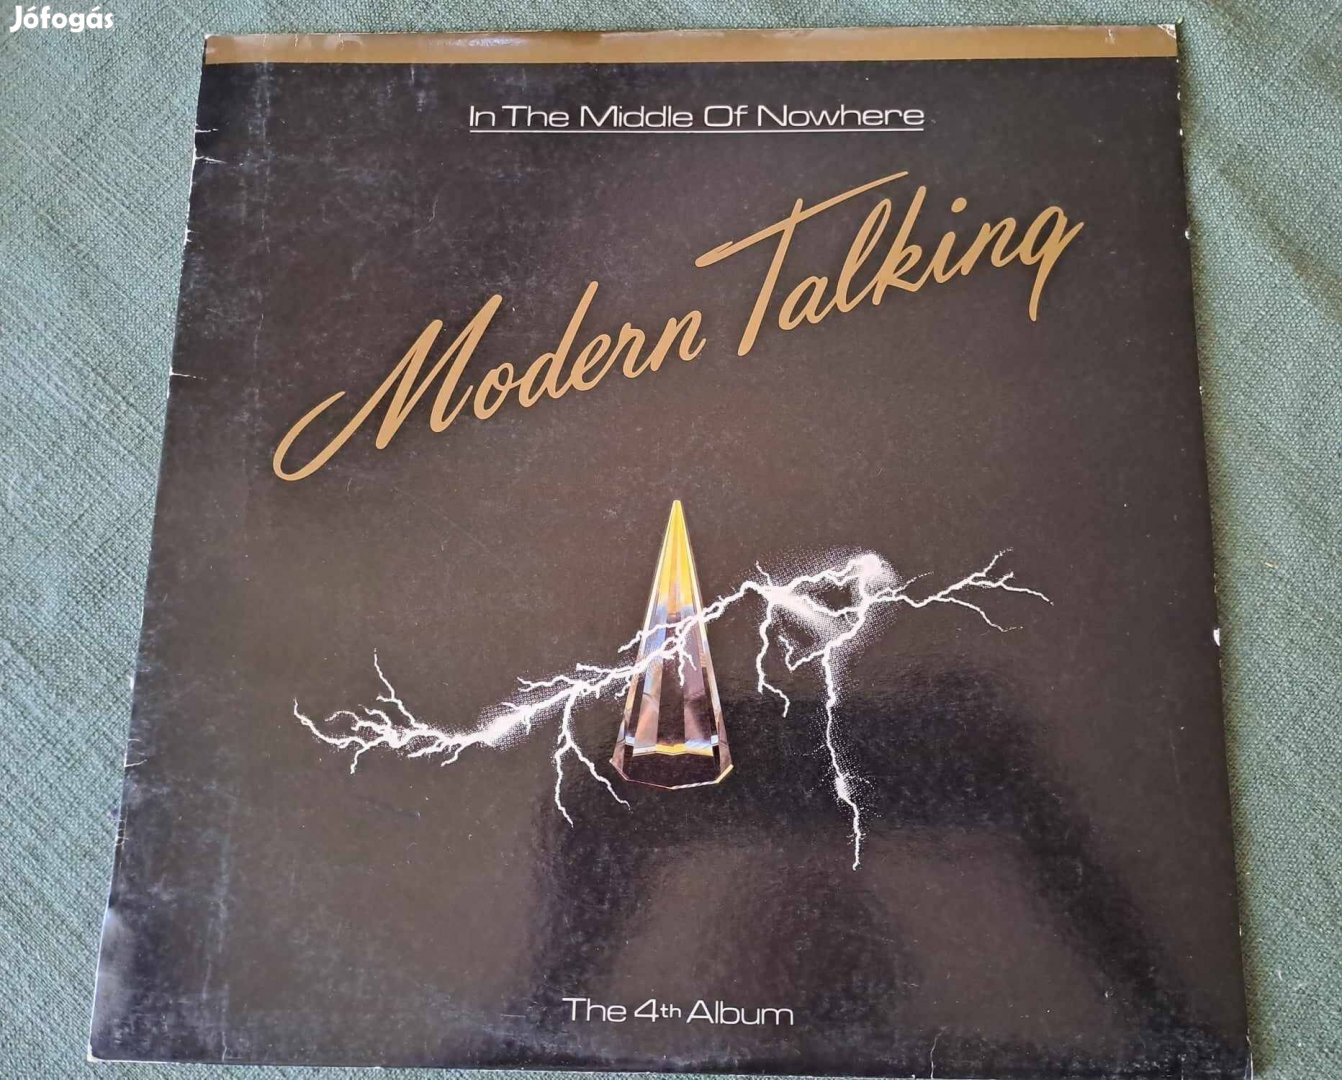 Modern Talking - In the Middle of Nowhere LP - The 4th album